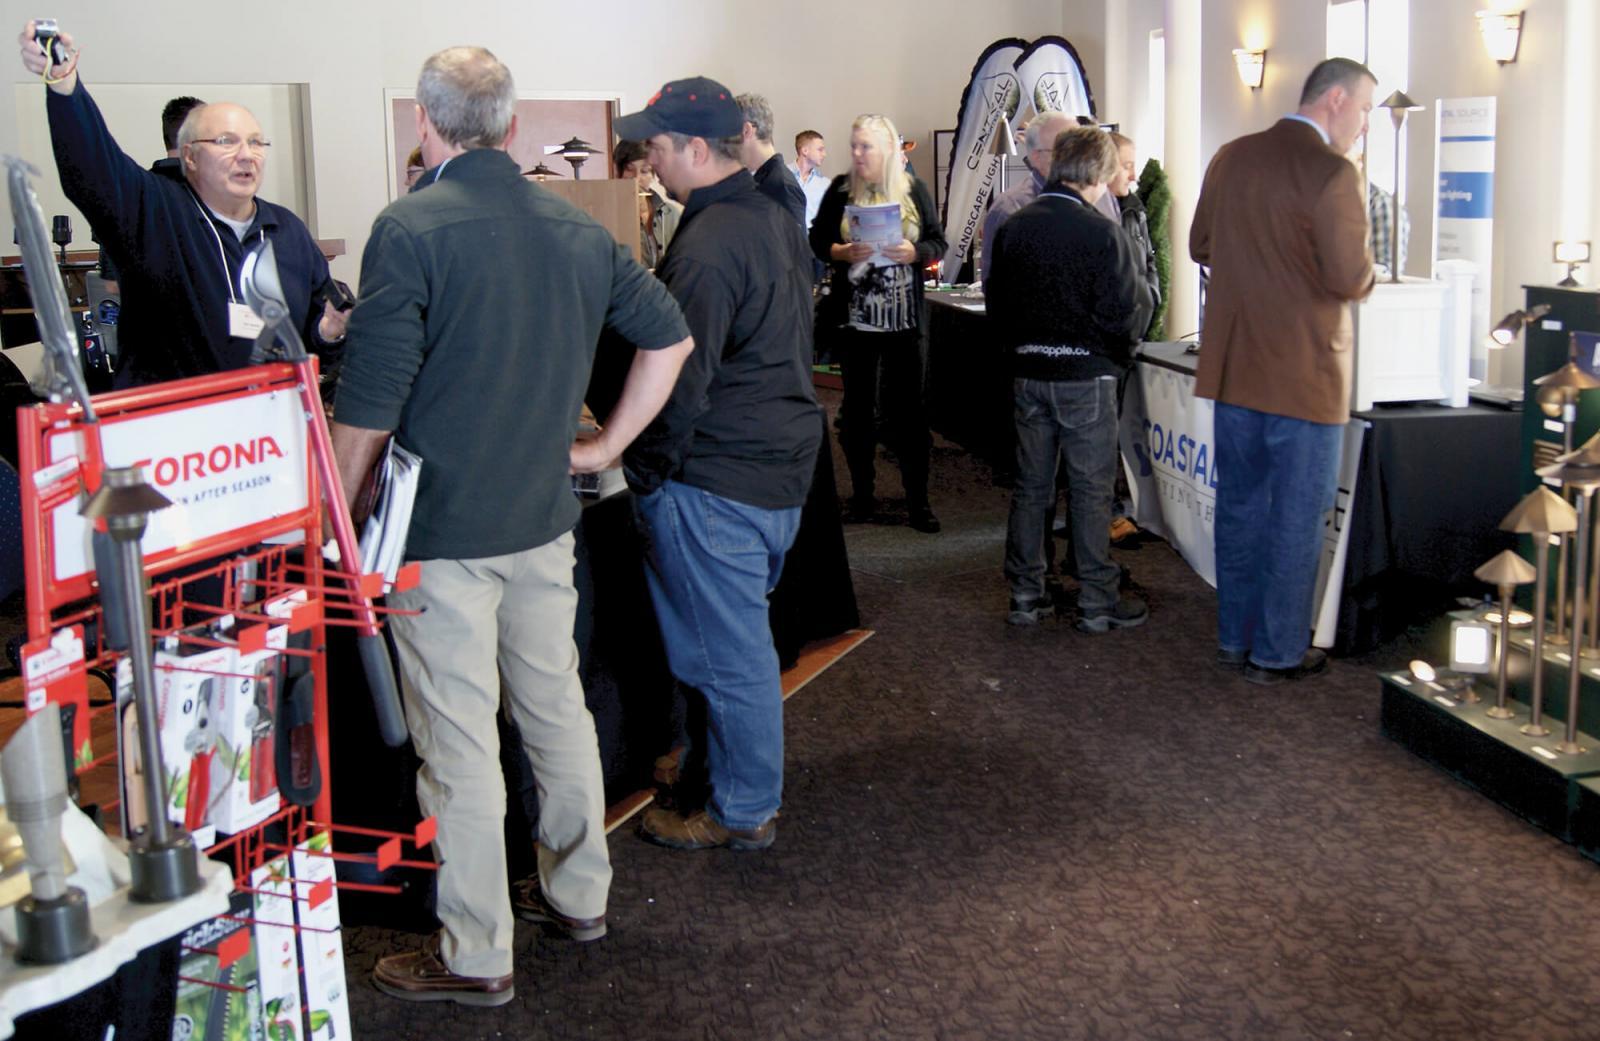 The exhibit area at this year’s lighting symposium was a big hit.